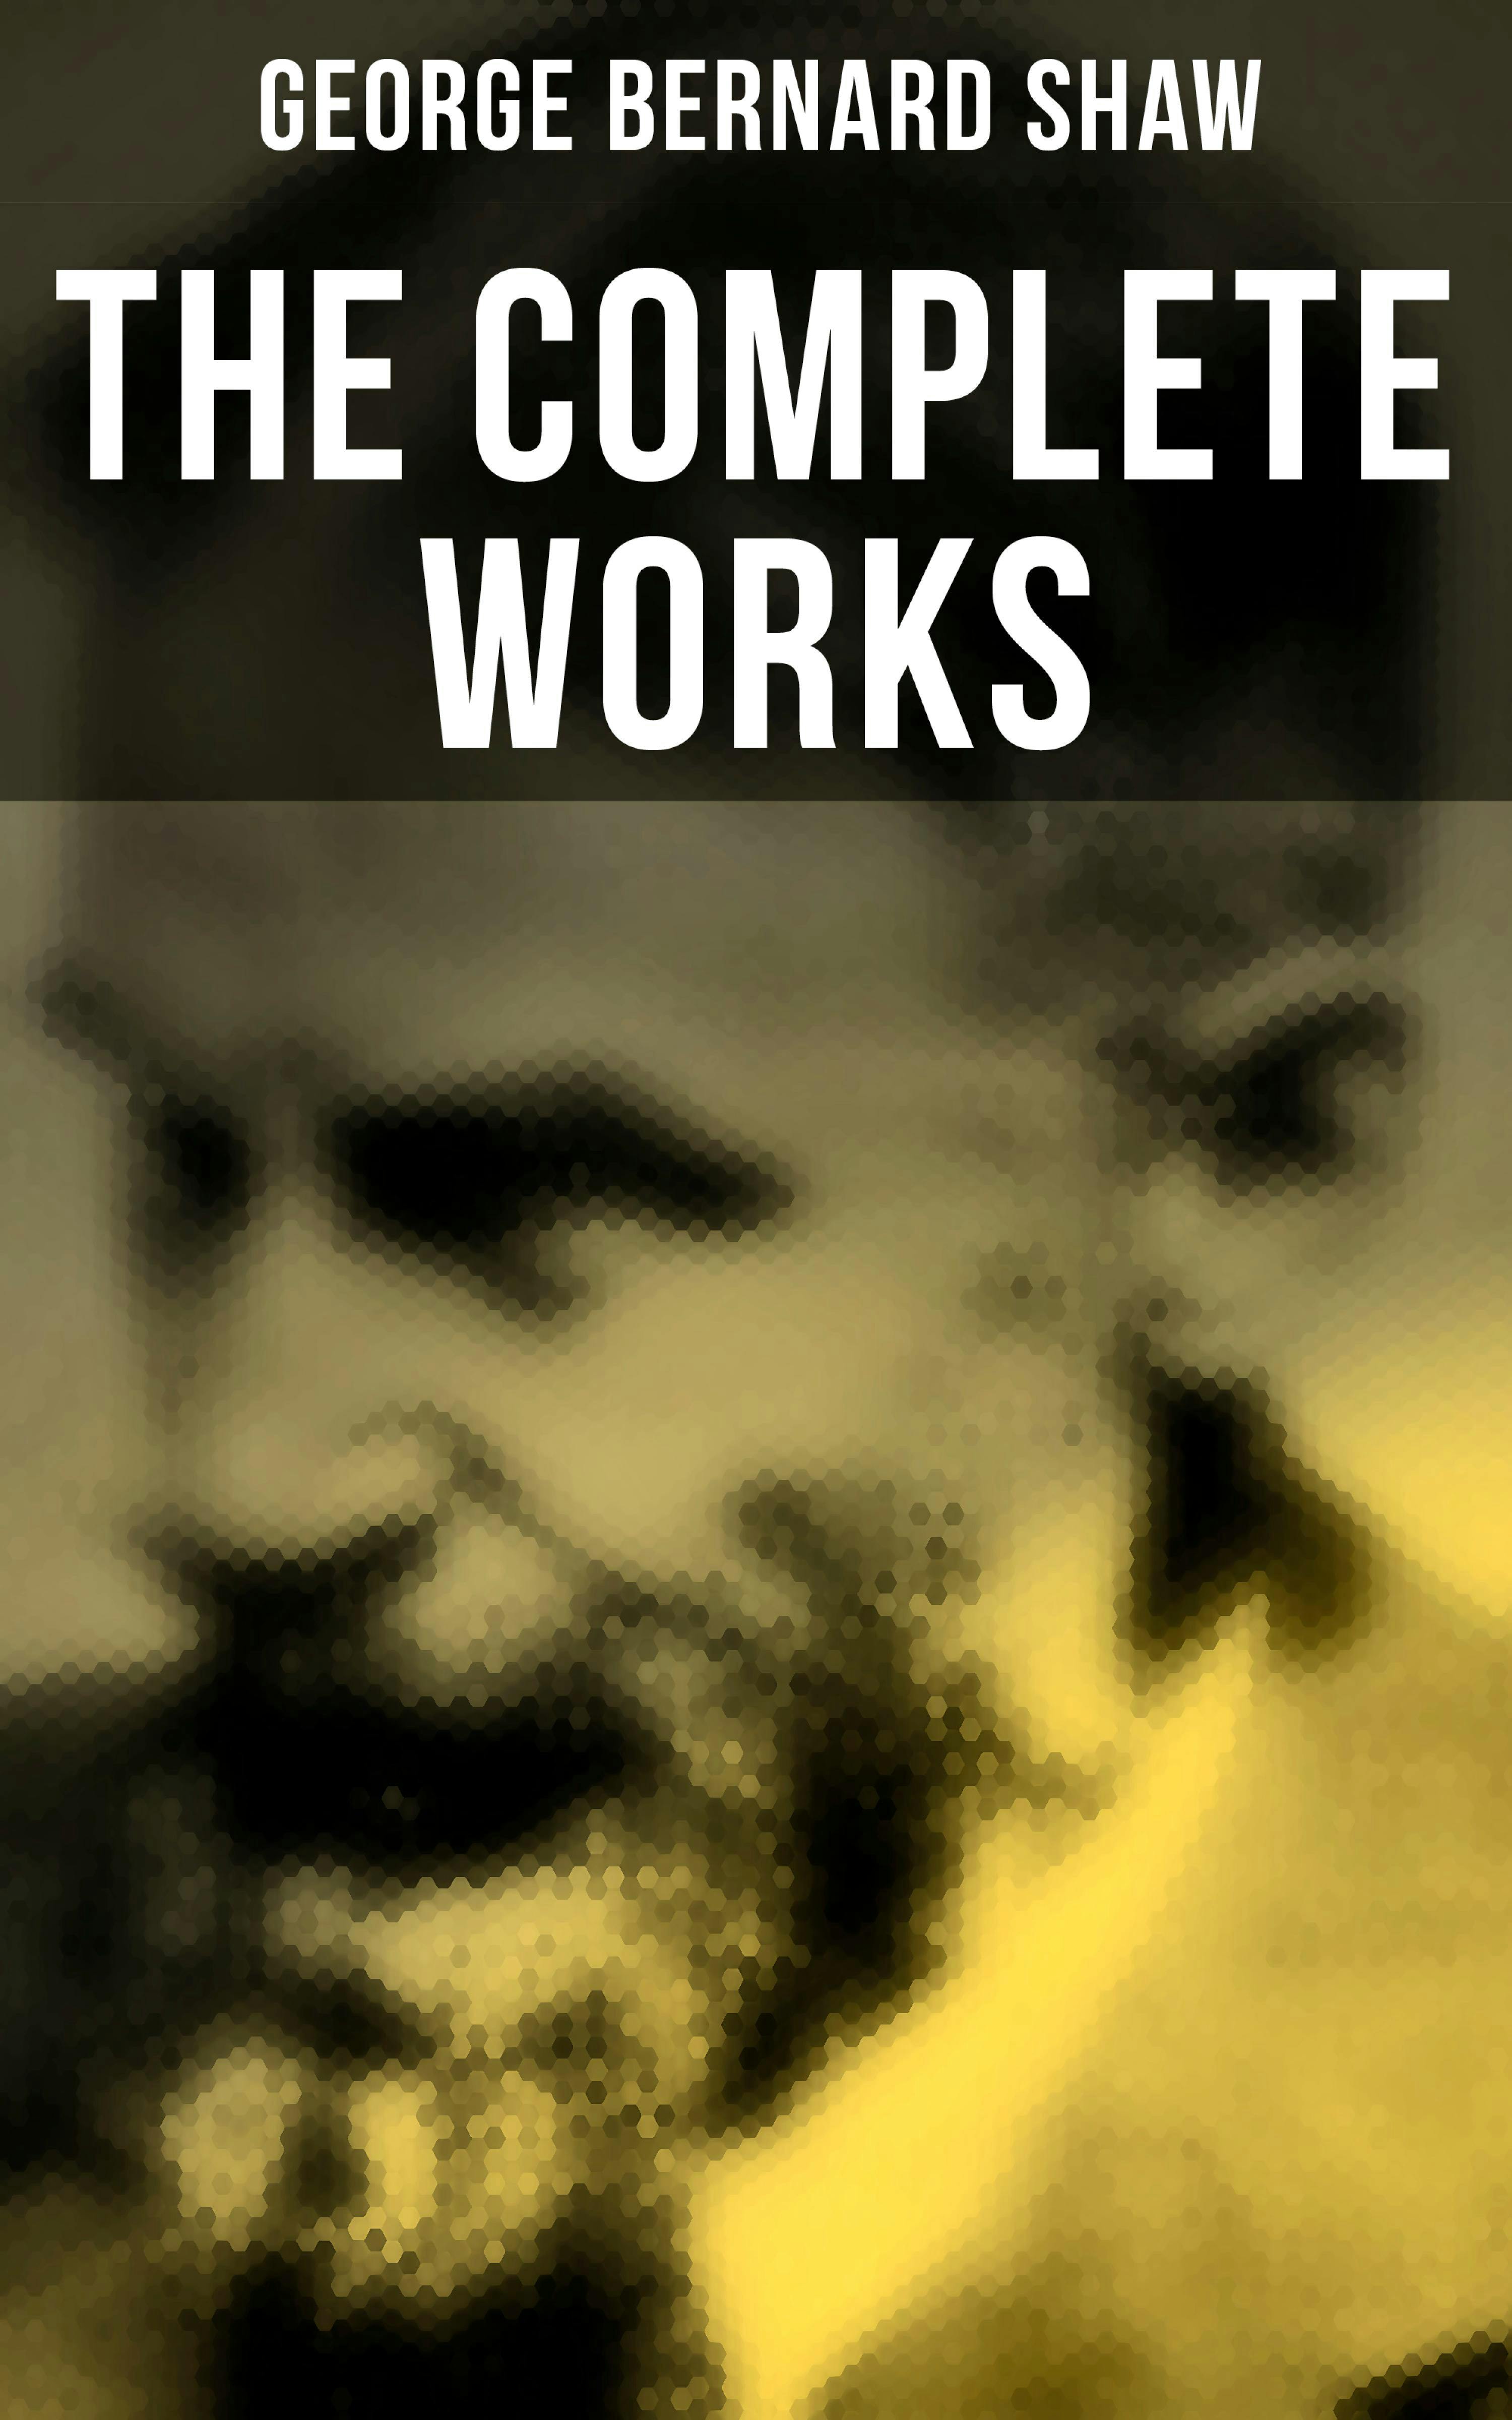 The Complete Works - George Bernard Shaw